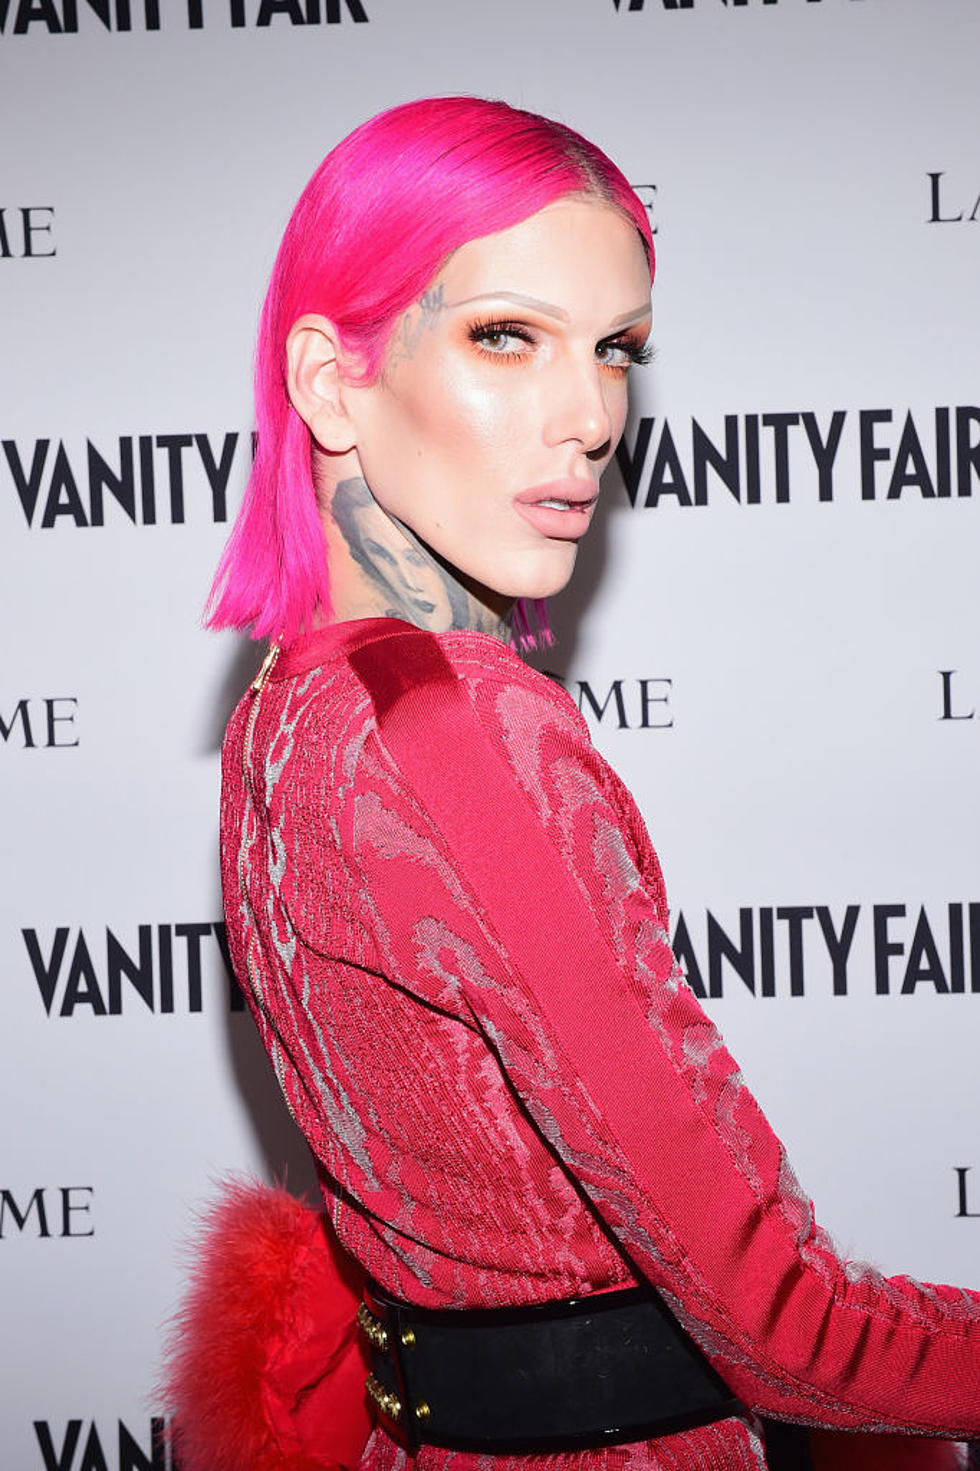 Jeffree Star Buys Texas Teacher Her Entire School Supply List for the Coming Year